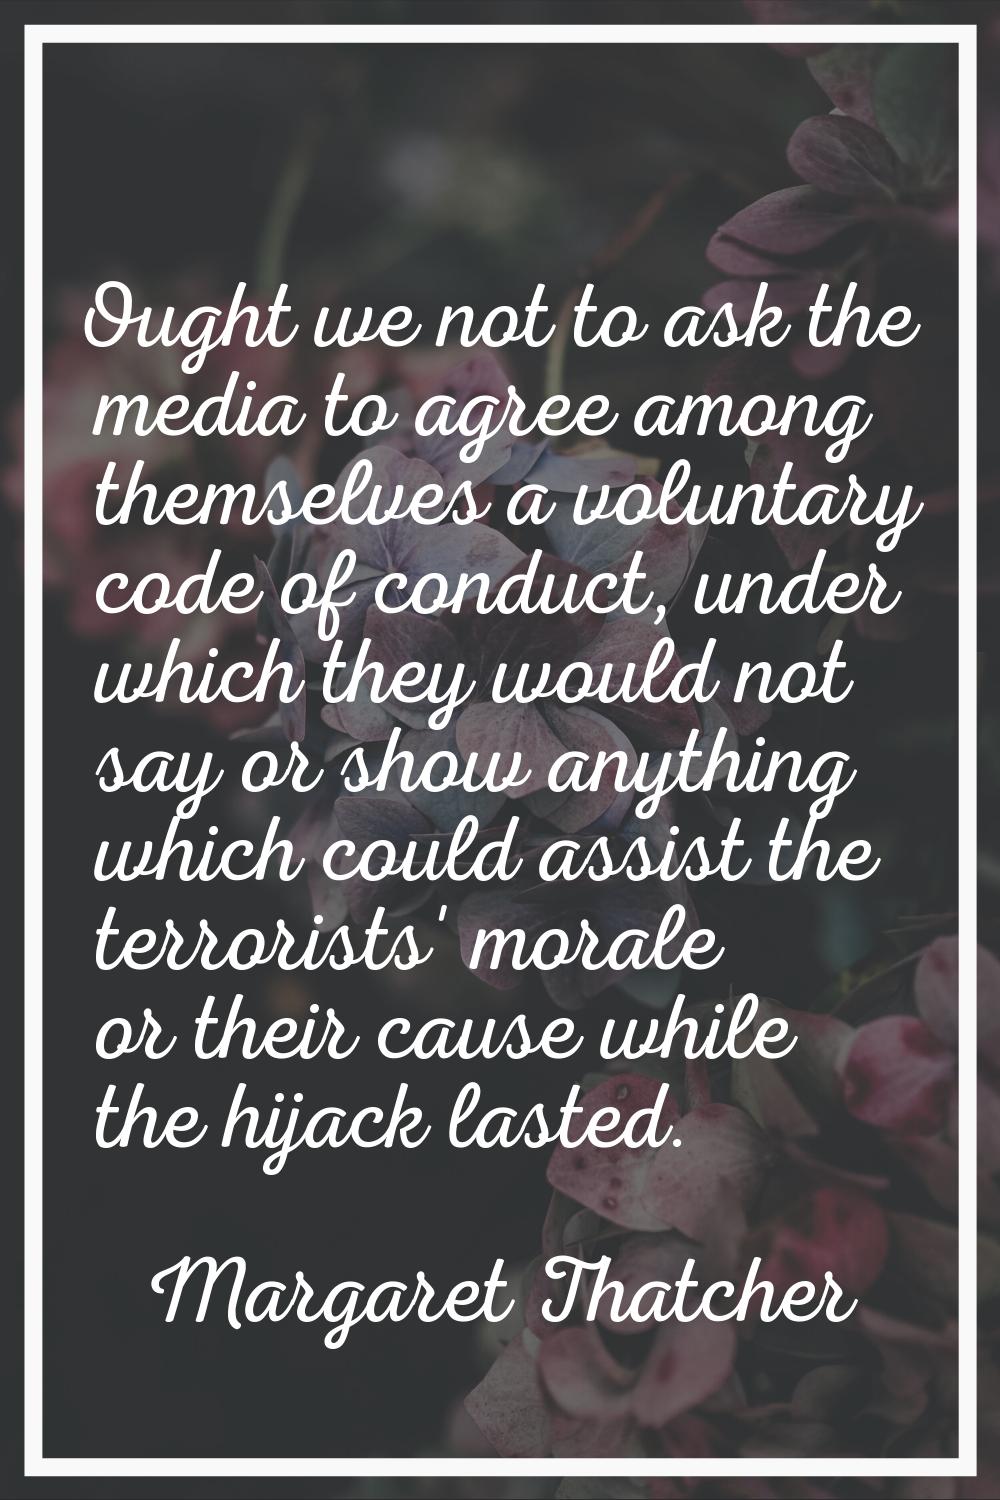 Ought we not to ask the media to agree among themselves a voluntary code of conduct, under which th